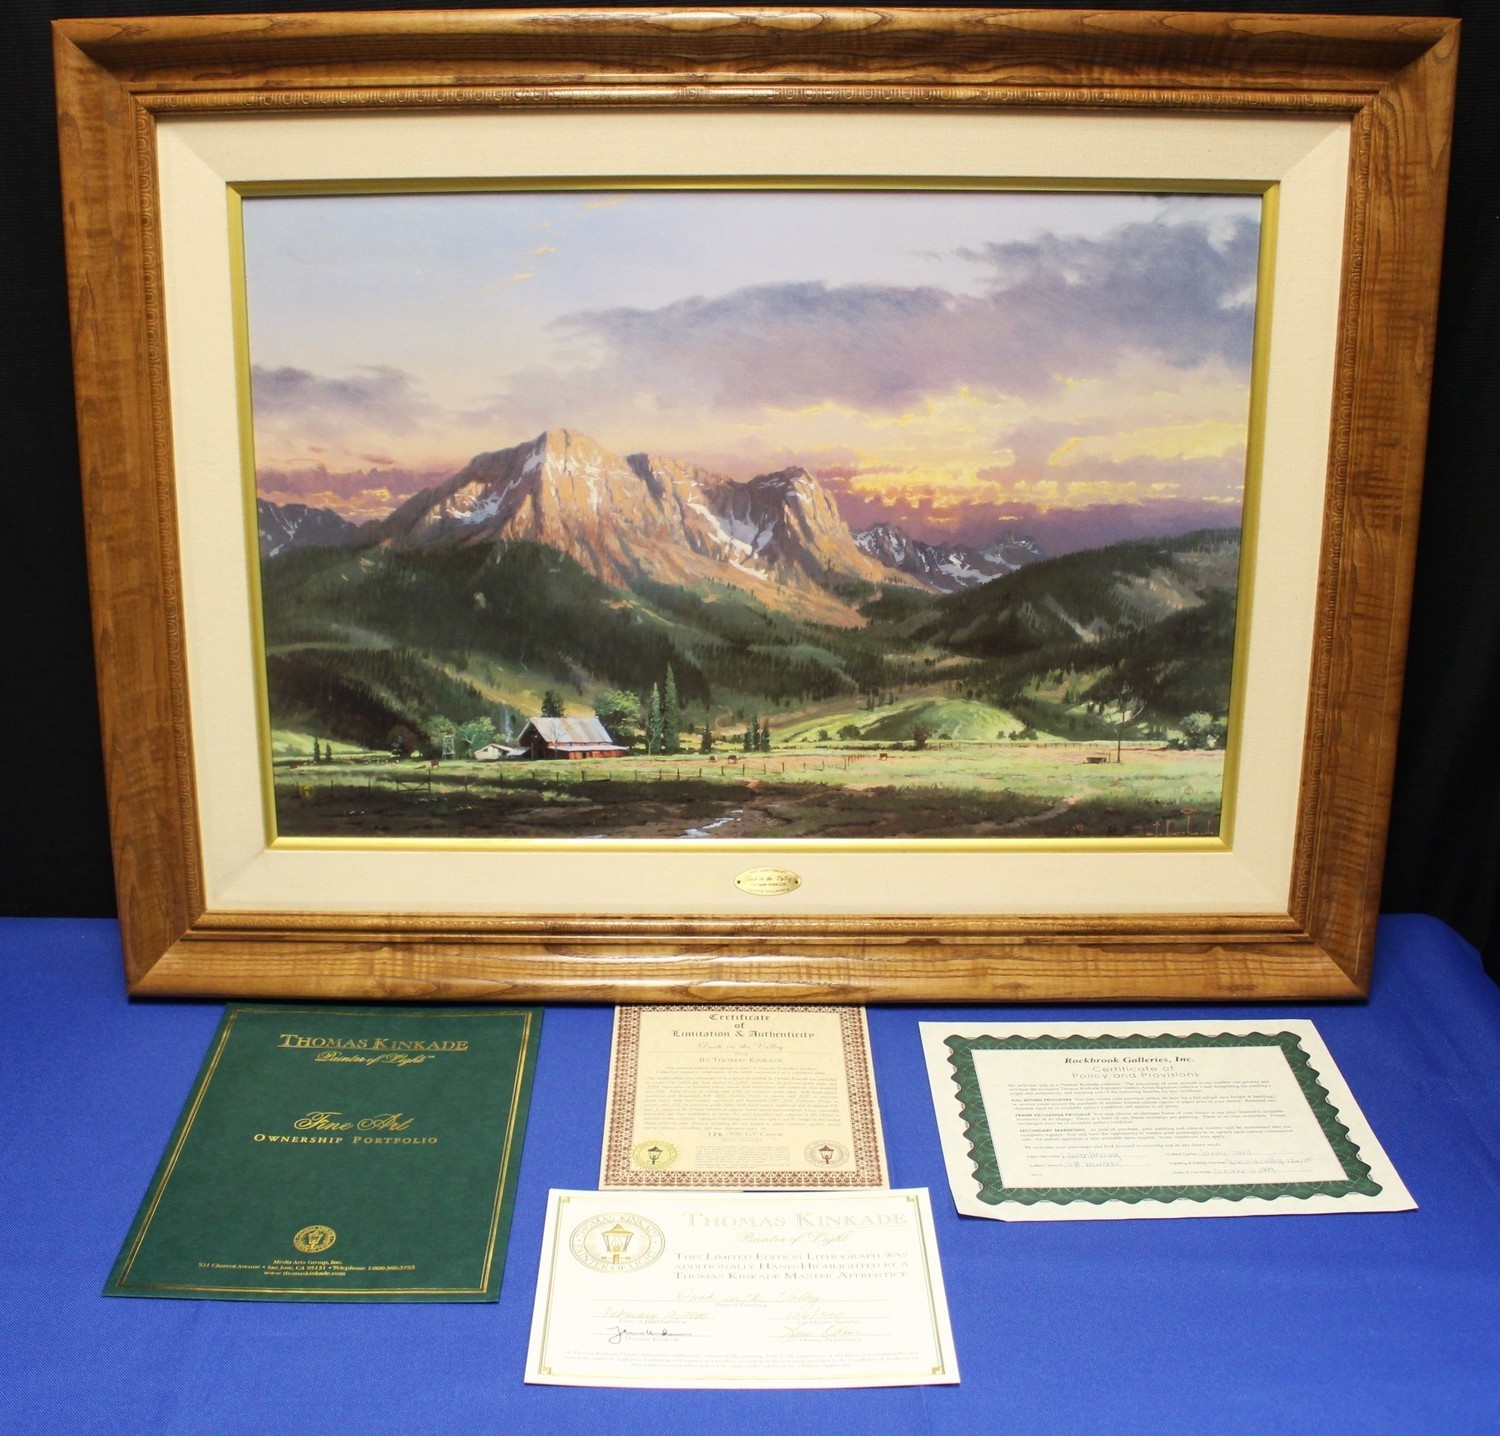 Thomas Kinkade "Dusk in Valley" 18 x 27 Framed Lithograph on Canvas G/P #126/500